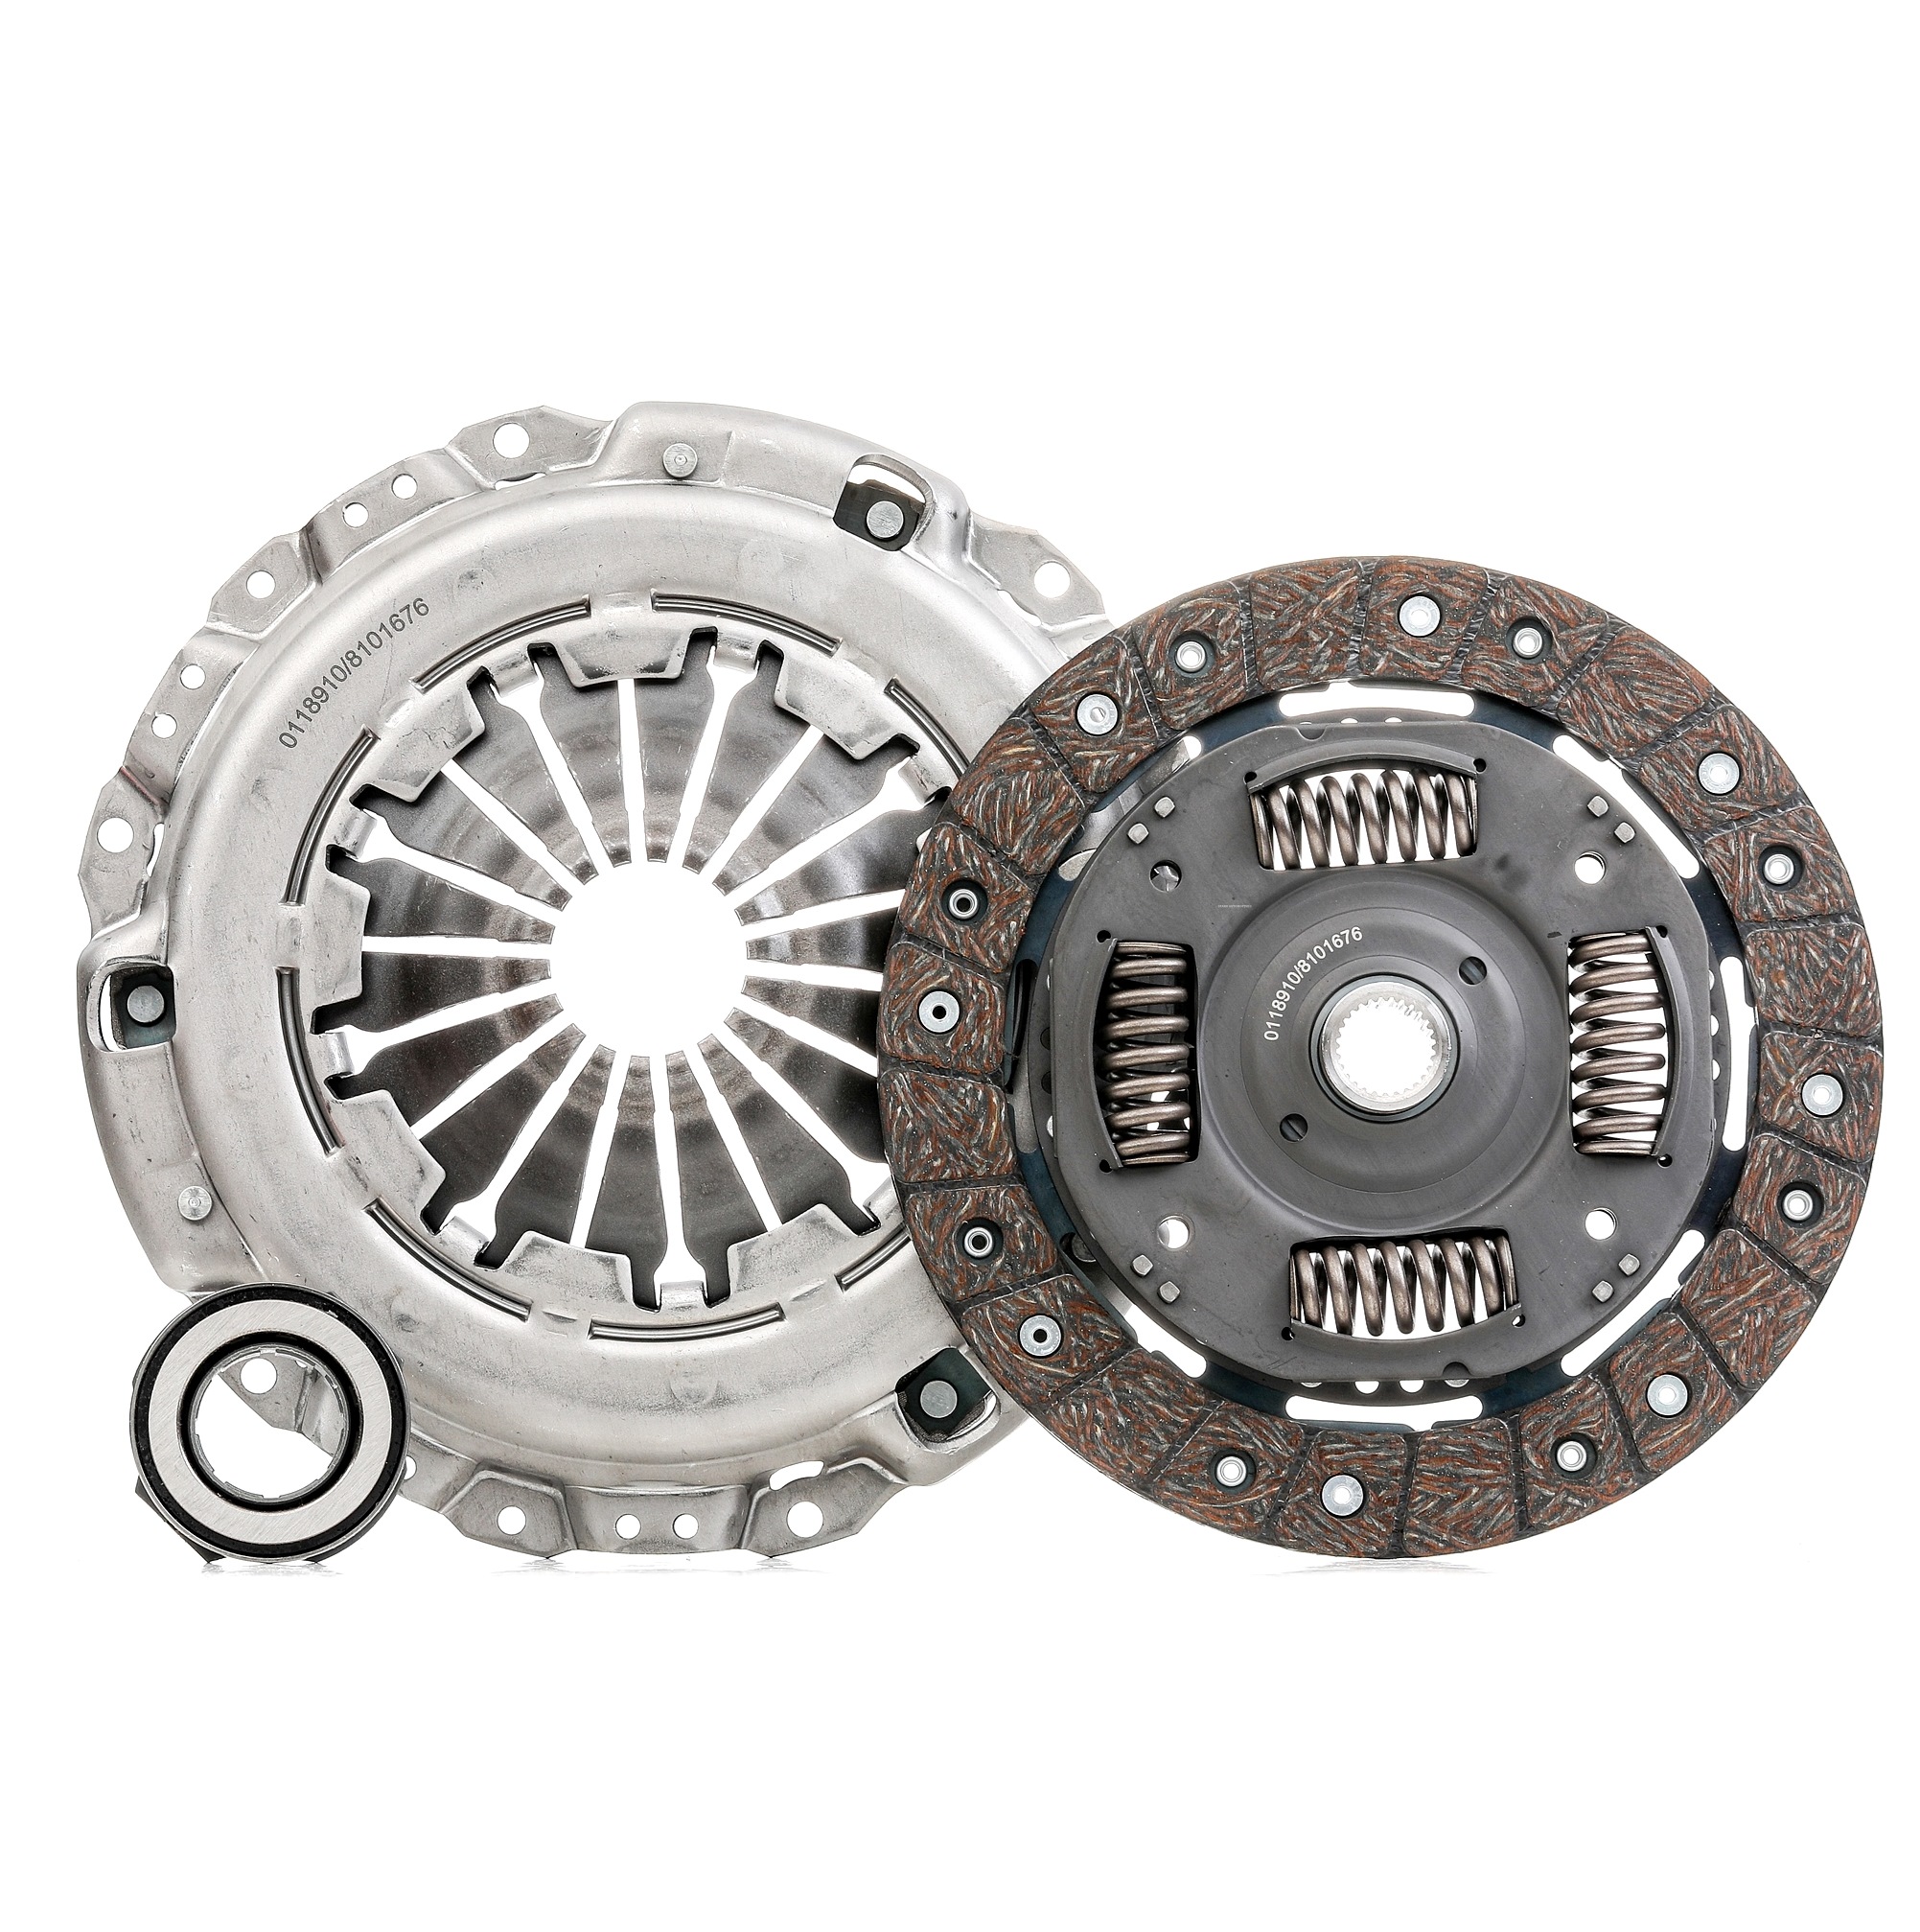 STARK SKCK-0100147 Clutch kit VW experience and price